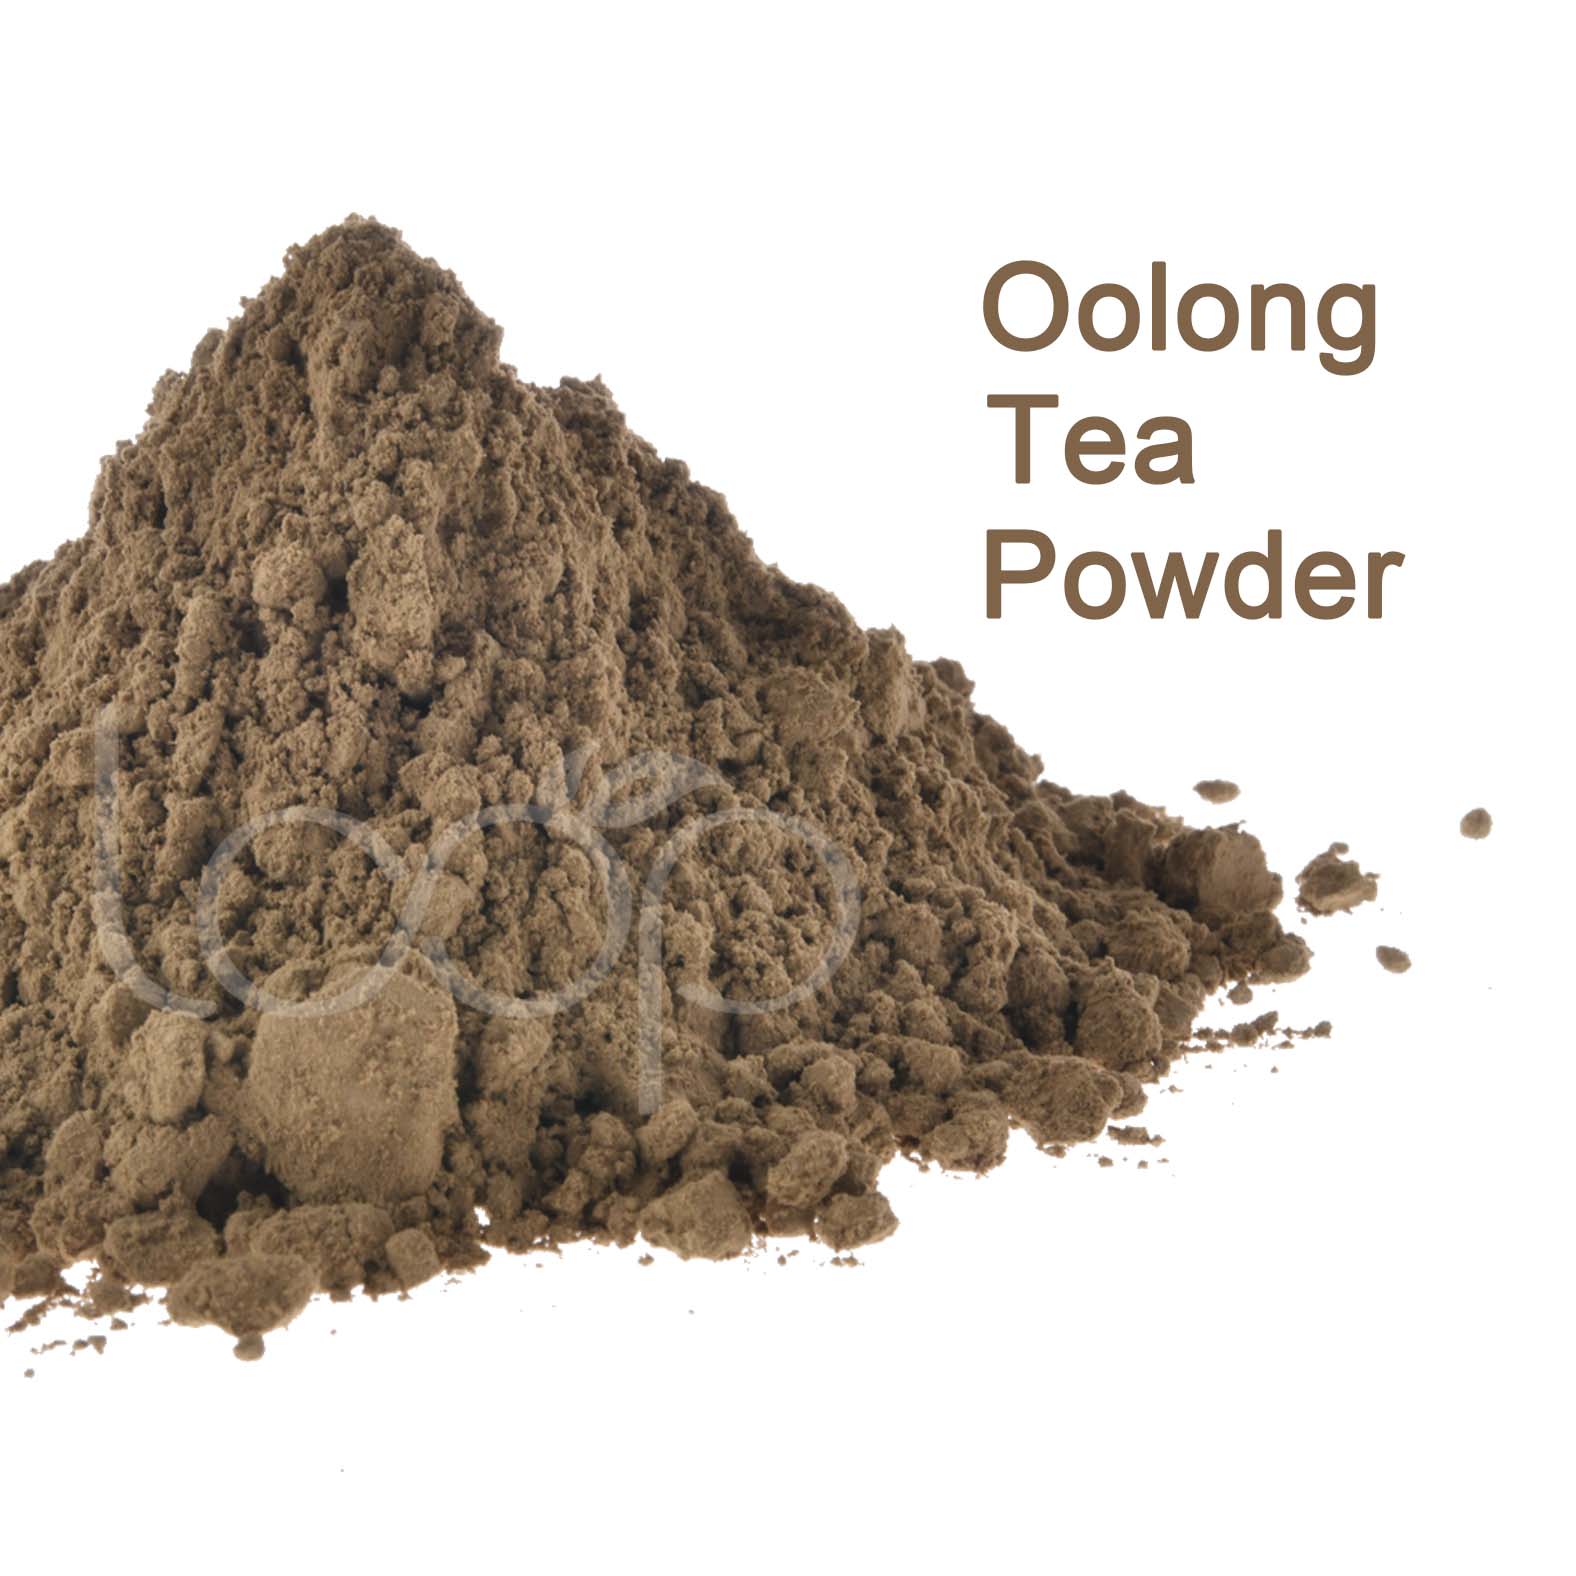 Oolong Tea Powder from China Wulong Featured Image